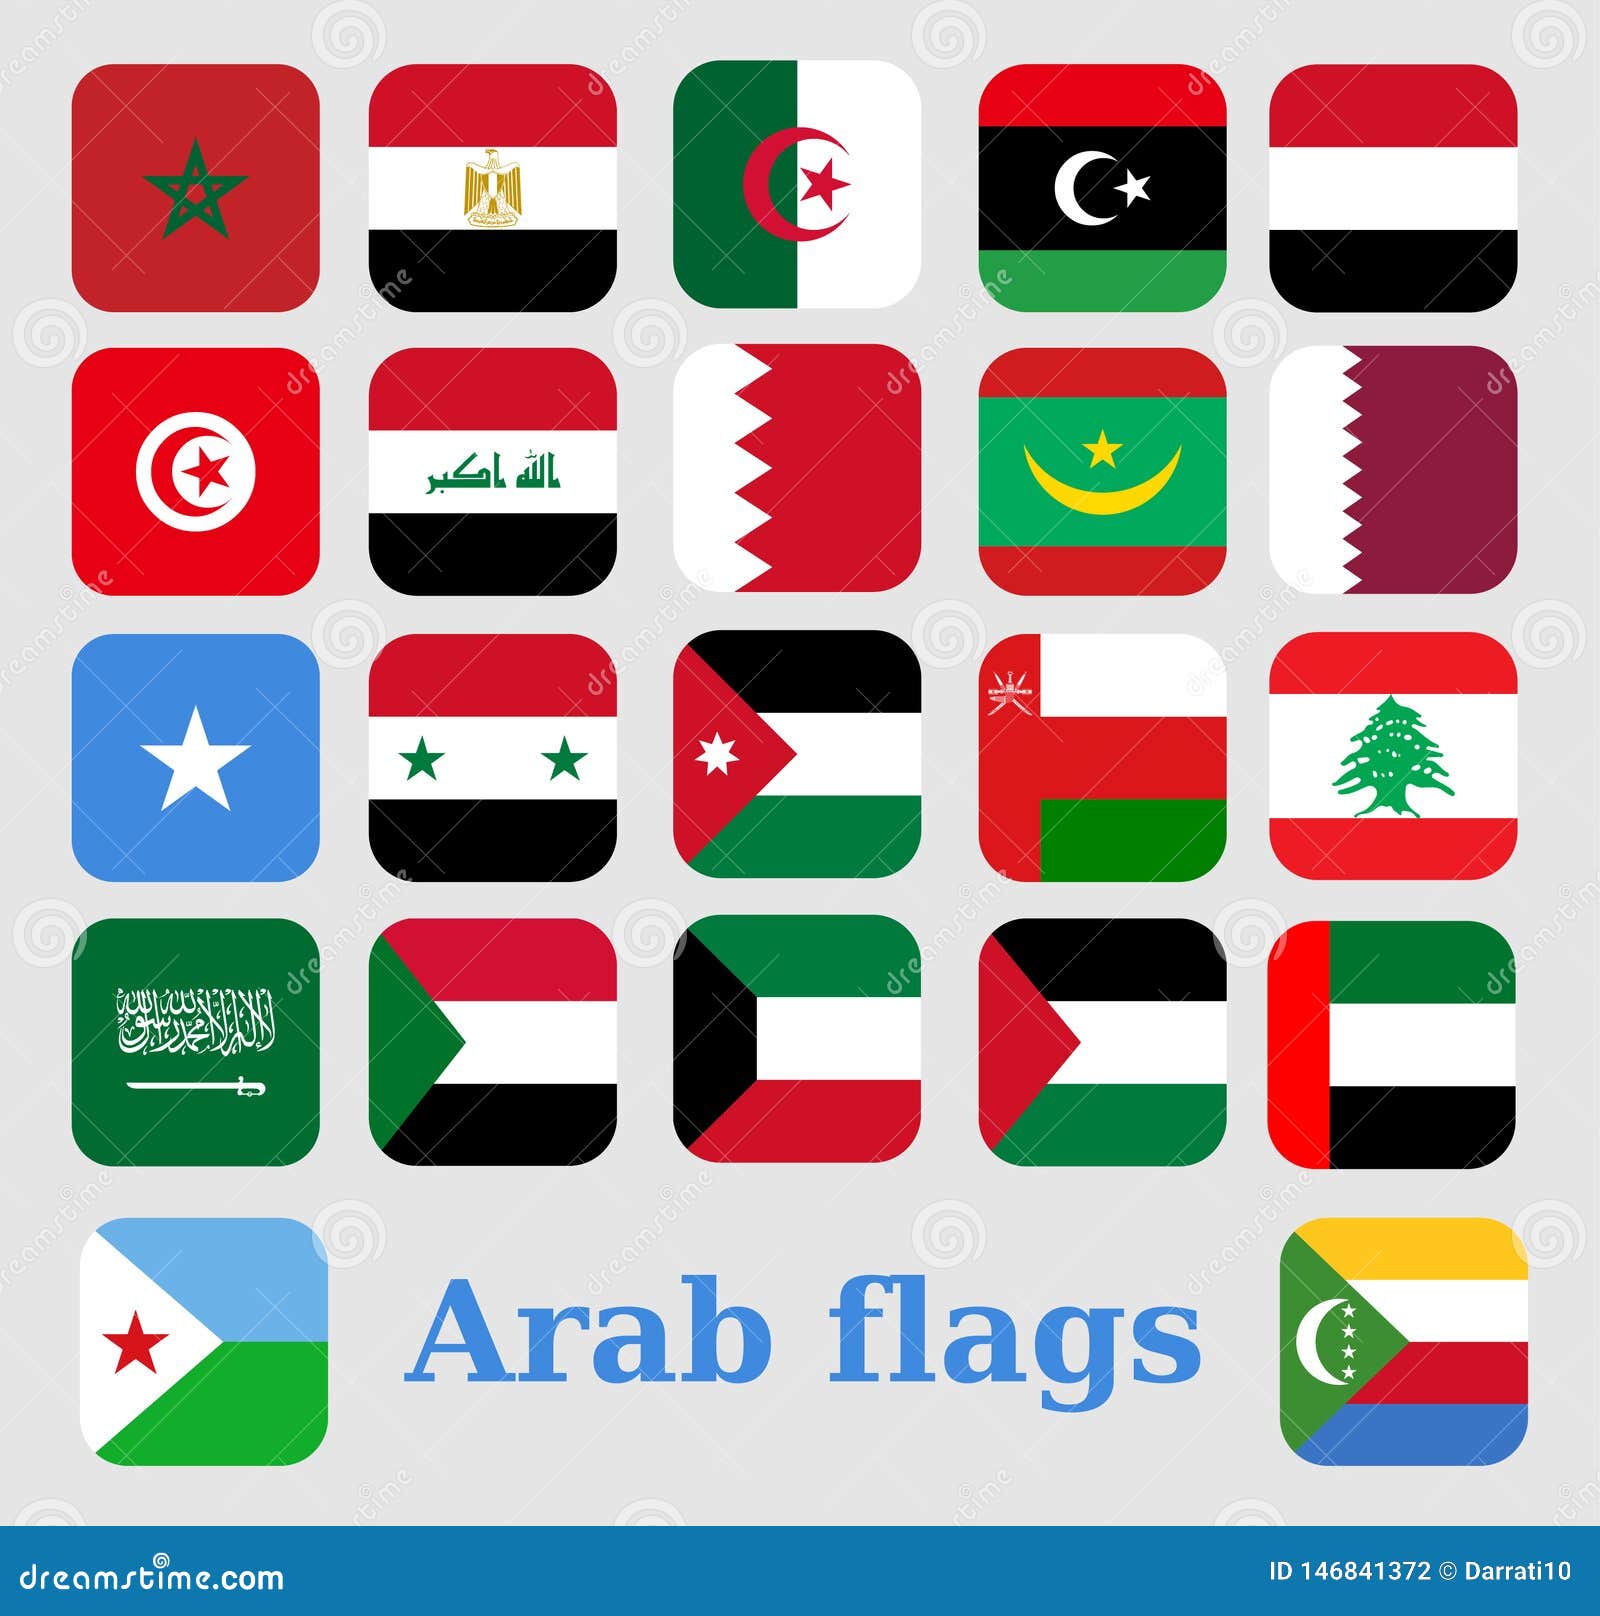 Islamic Countries Flags With Names